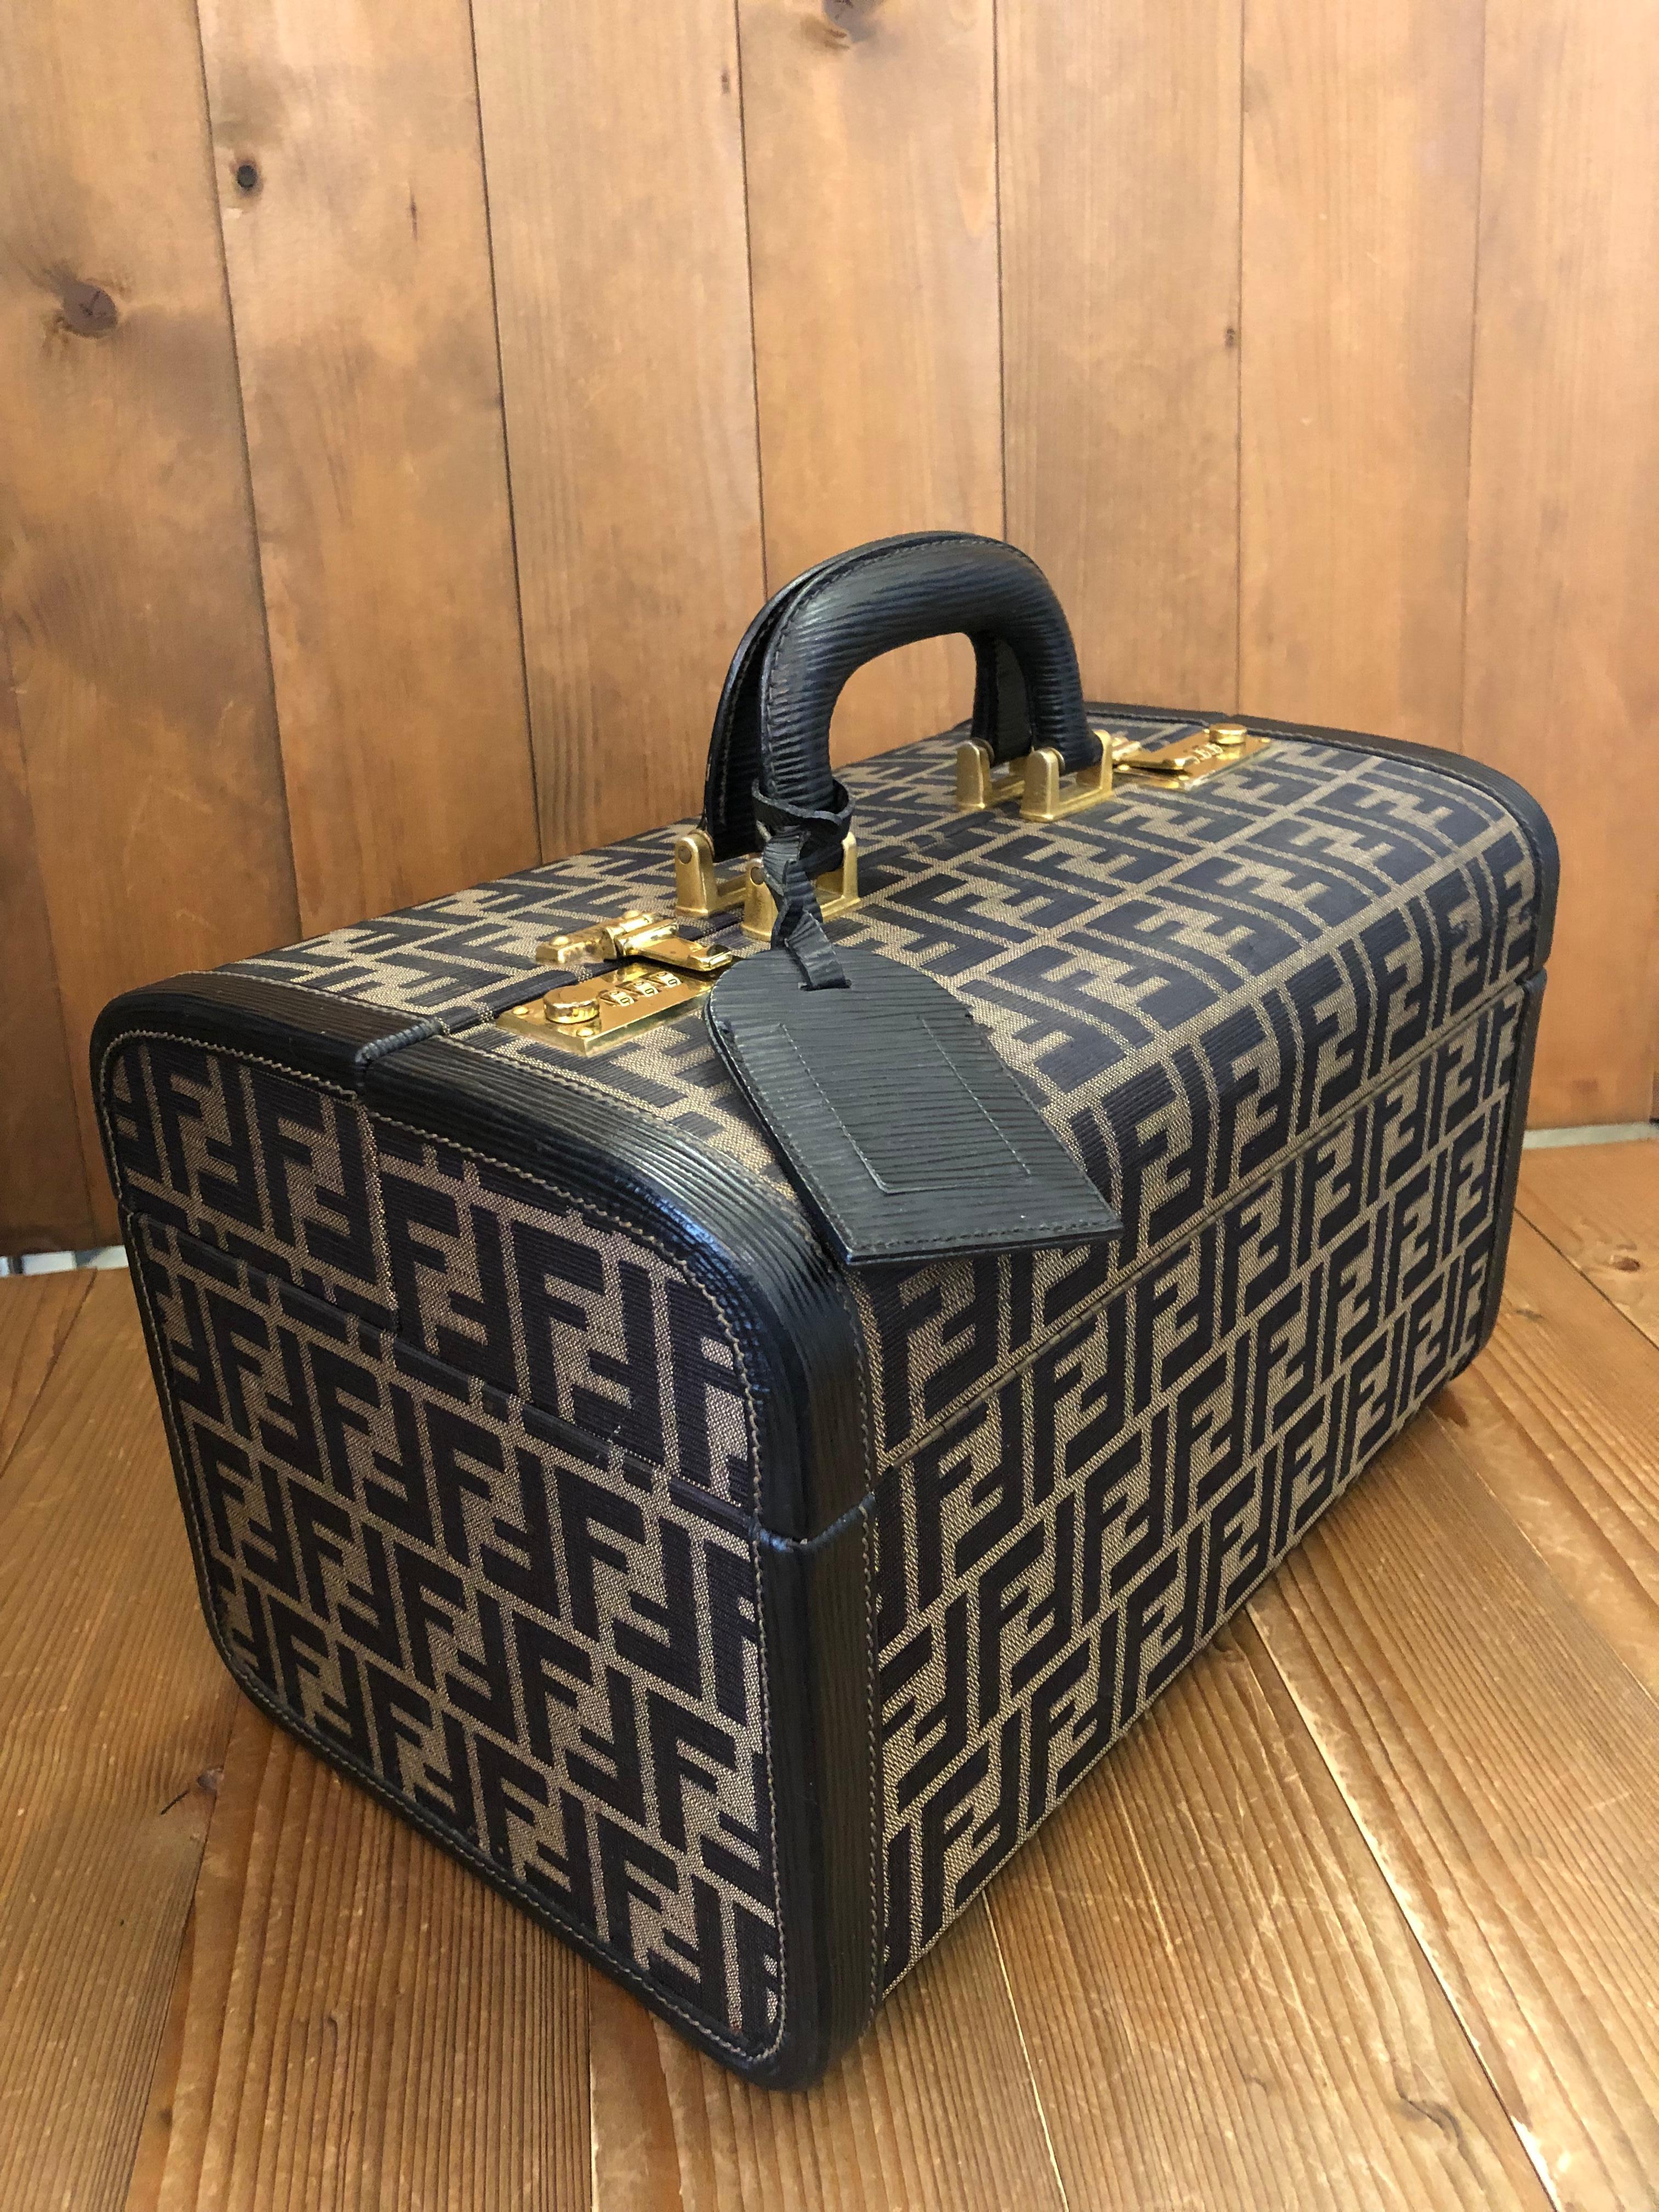 This Vintage FENDI vanity trunk case is crafted of Fendi’s signature brown FF Zucca jacquard and black leather. This trunk features sturdy leather handles and two combination locks for safeguarding your valuables. Front double-lock closure opens to